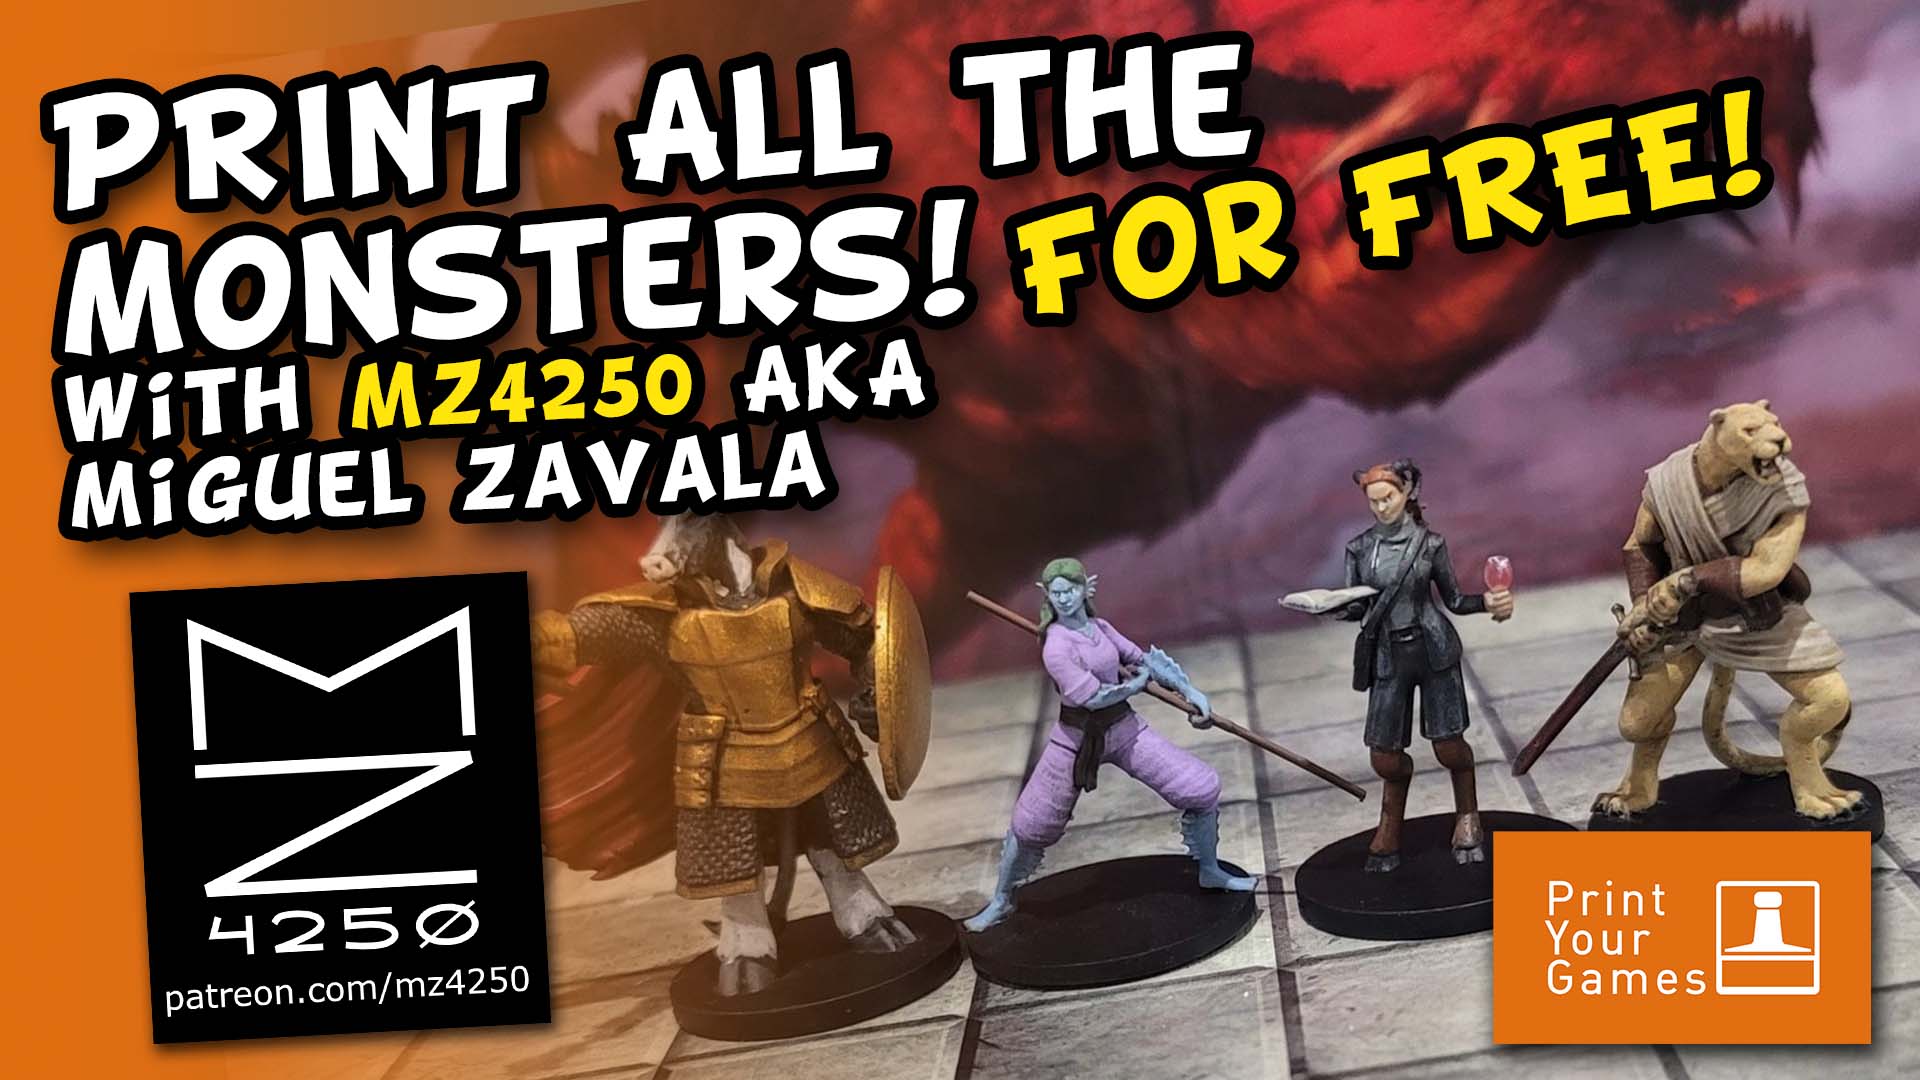 Print all the Monsters! For Free! With MZ4250